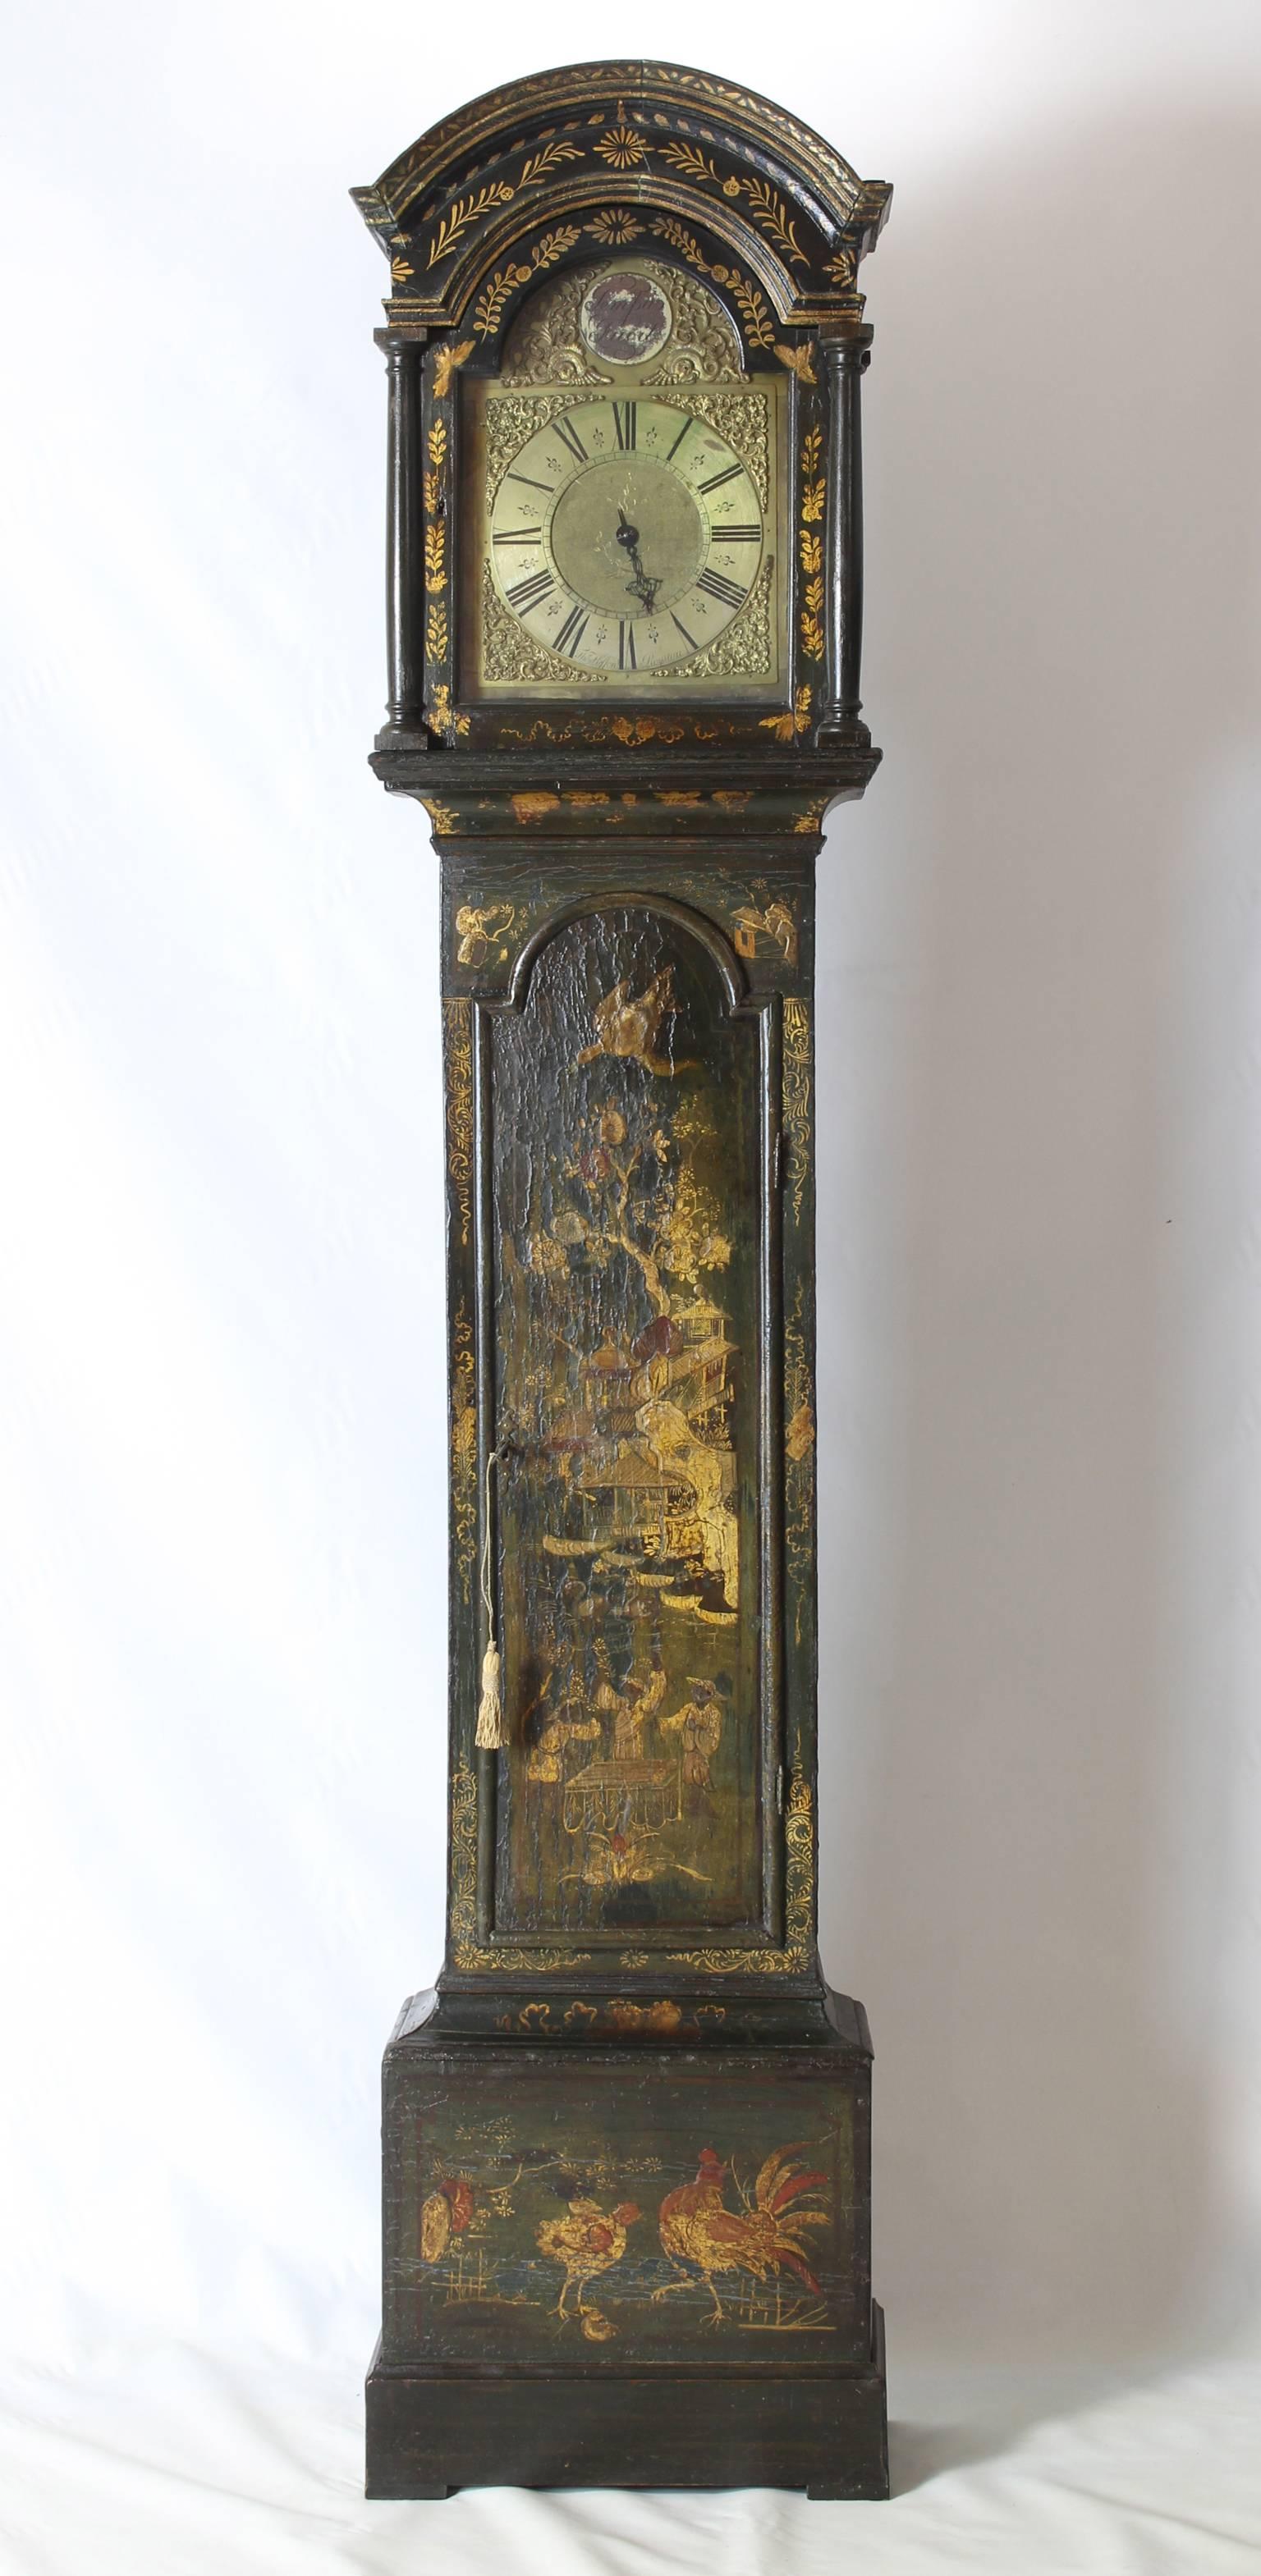 A tall and elegantly proportioned late 18th century English dark green chinoiserie decorated long case clock with 30 hour movement by Thomas Hefford, Royston.